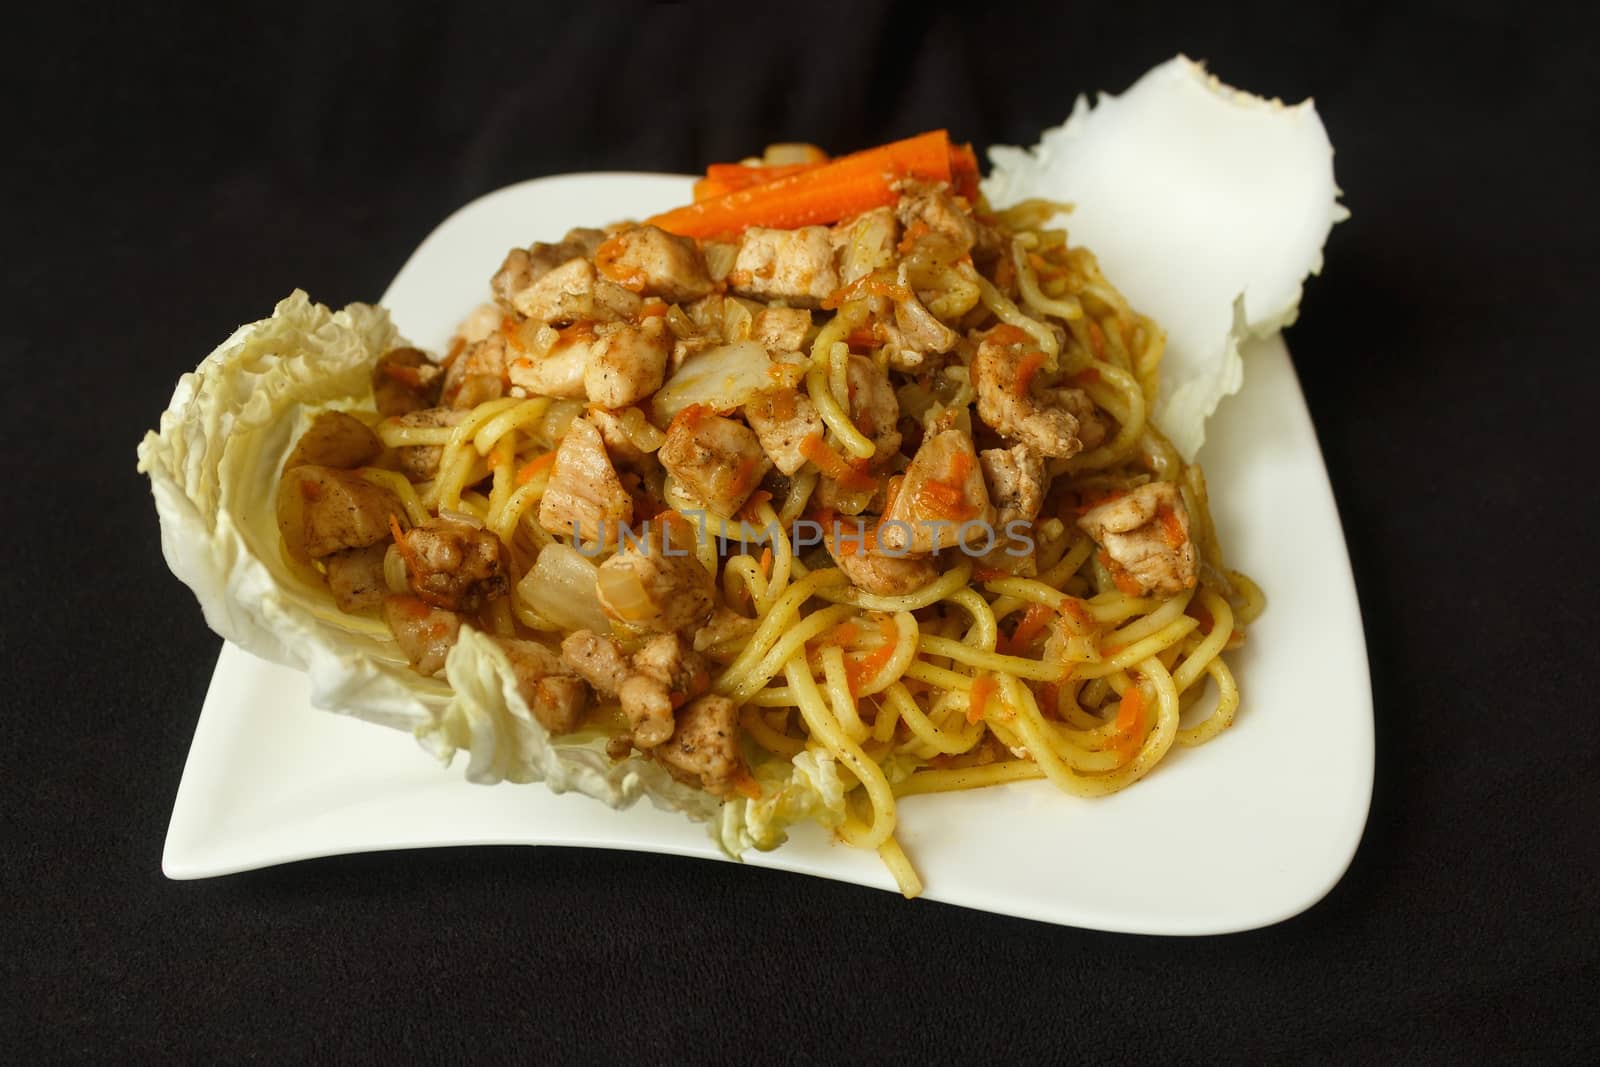 Taken 15. January 2016 Jablonec above Nisou, Czech Republic china noodle chicken meat odds grated carrot, odds cabbage to leaf Chinese cabbage white plate dark background